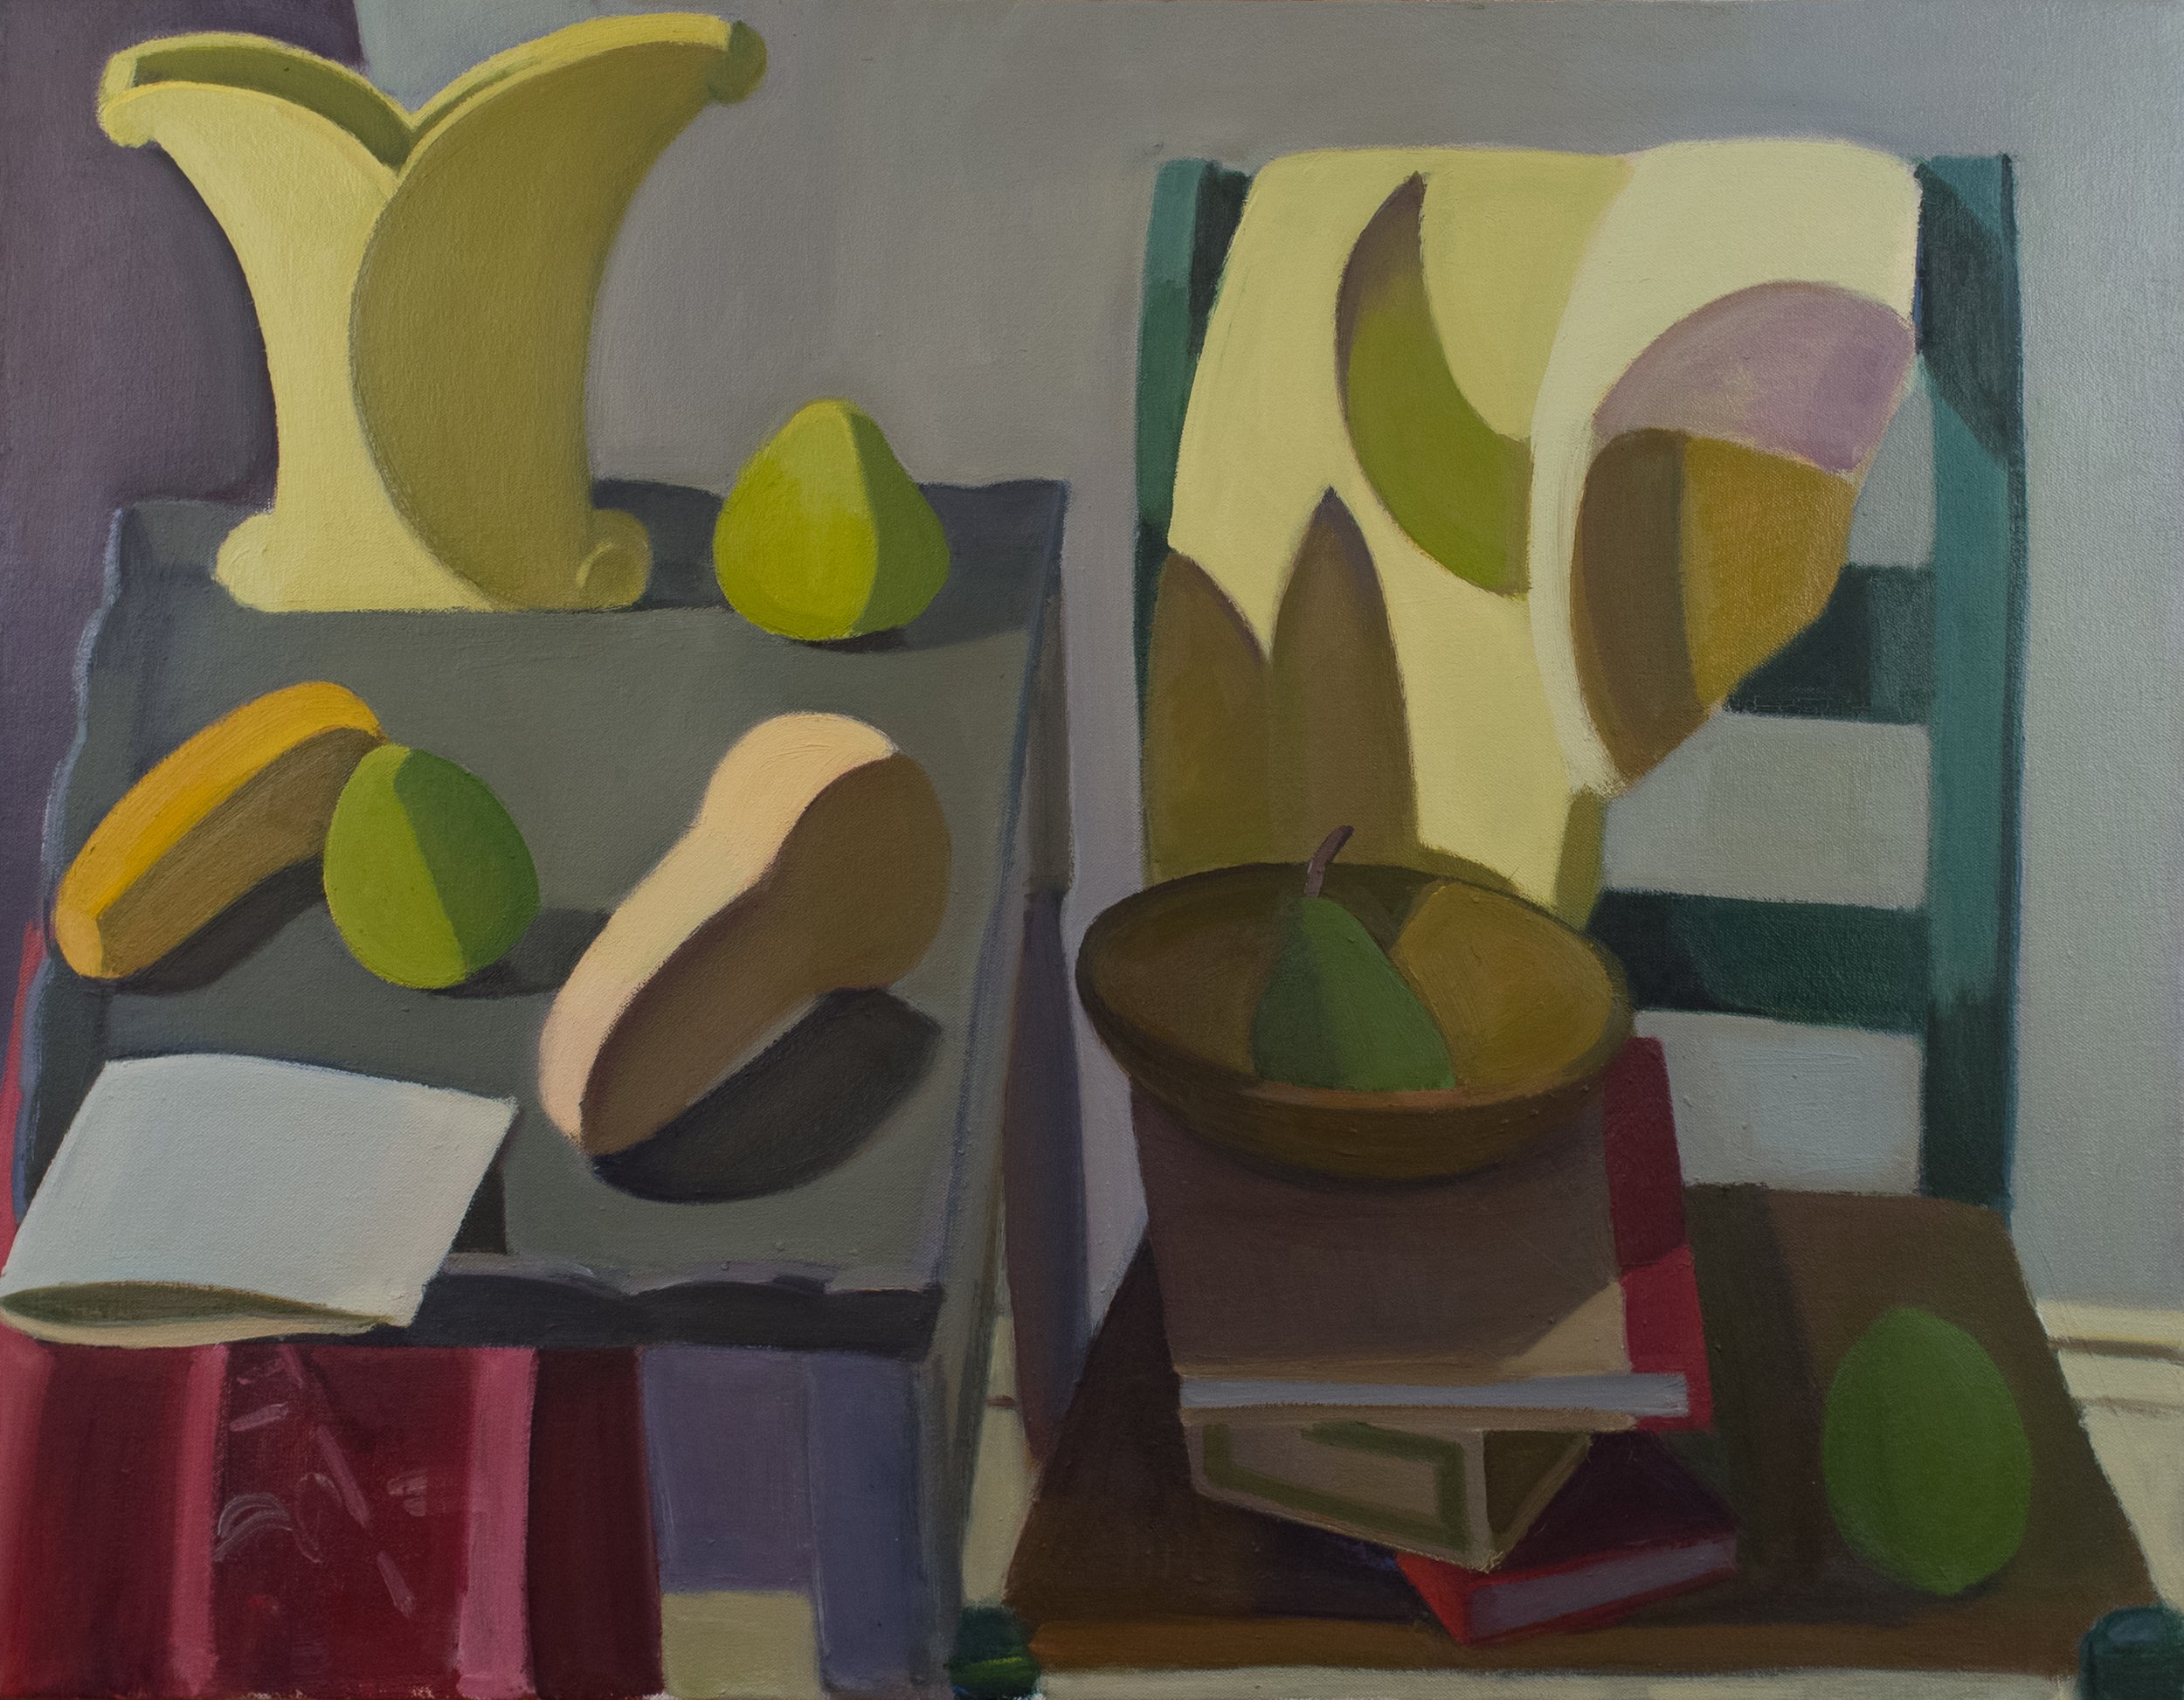   Yellow Vase, Tin Tray and Tower of Books , 1992, oil/canvas, 24 x 31 in. (Private collection) 